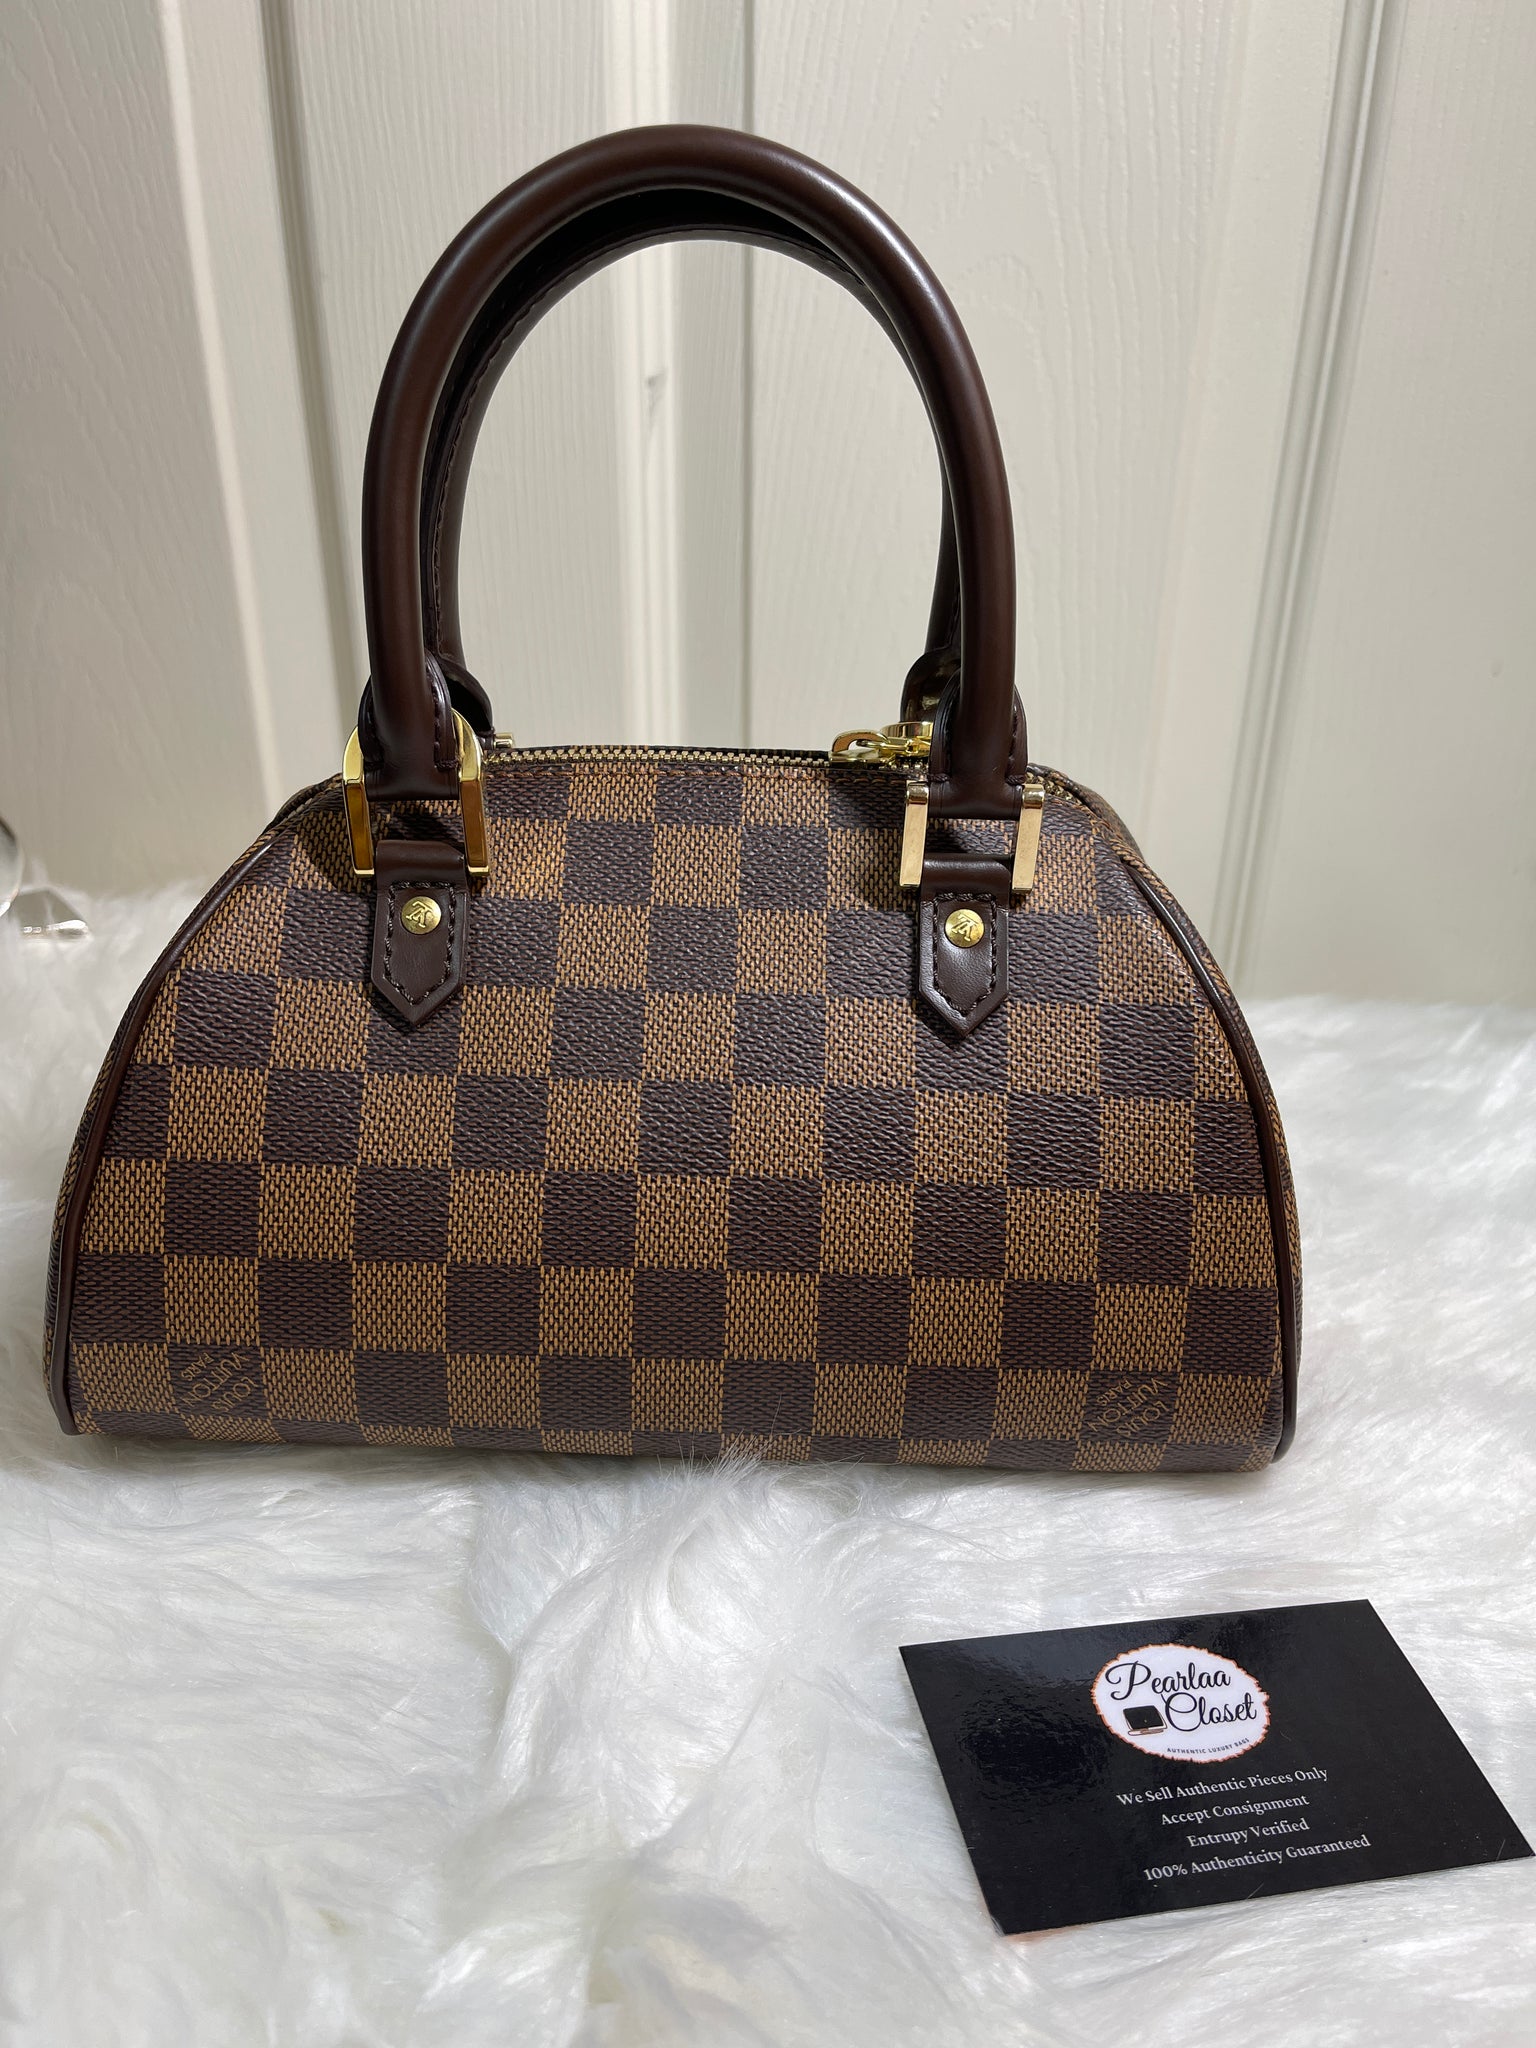 Louis Vuitton Small Bags & Handbags for Women, Authenticity Guaranteed